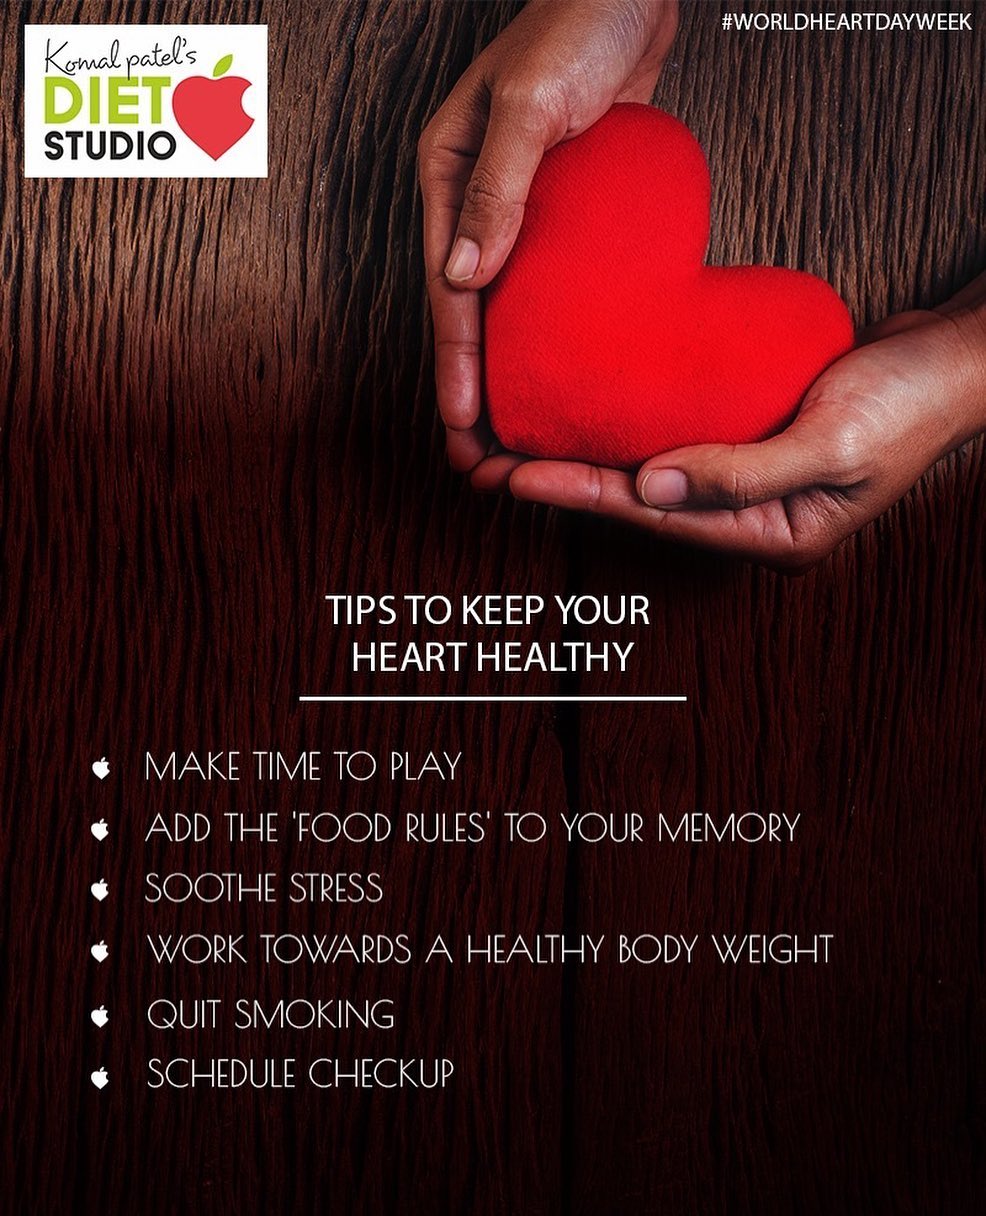 Keep a check on these steps to ensure a healthy heart!

#komalpatel #diet #goodfood #eathealthy #goodhealth #worldheartday